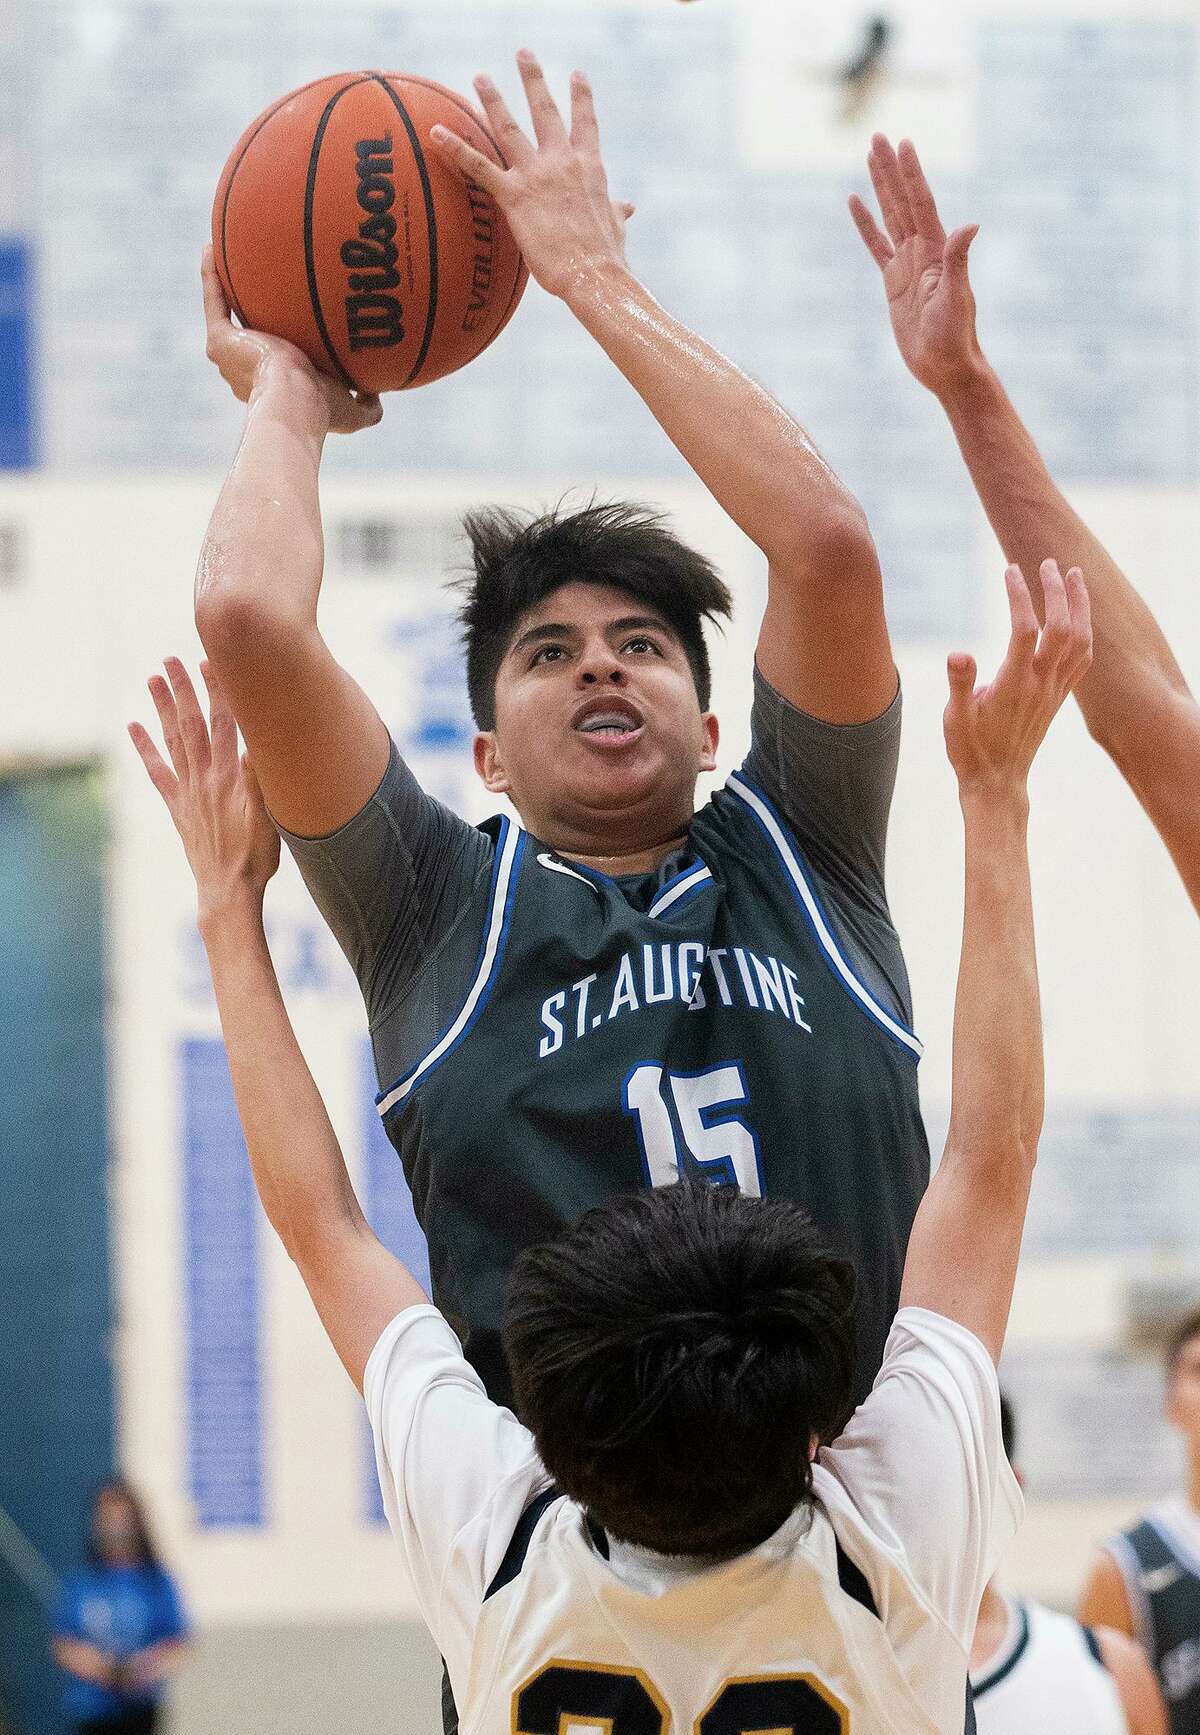 St. Augustine High School’s Chris Ramirez was given honorable mention All-State honors after averaging 15.6 points, 9.9 rebounds and 3.4 steals.